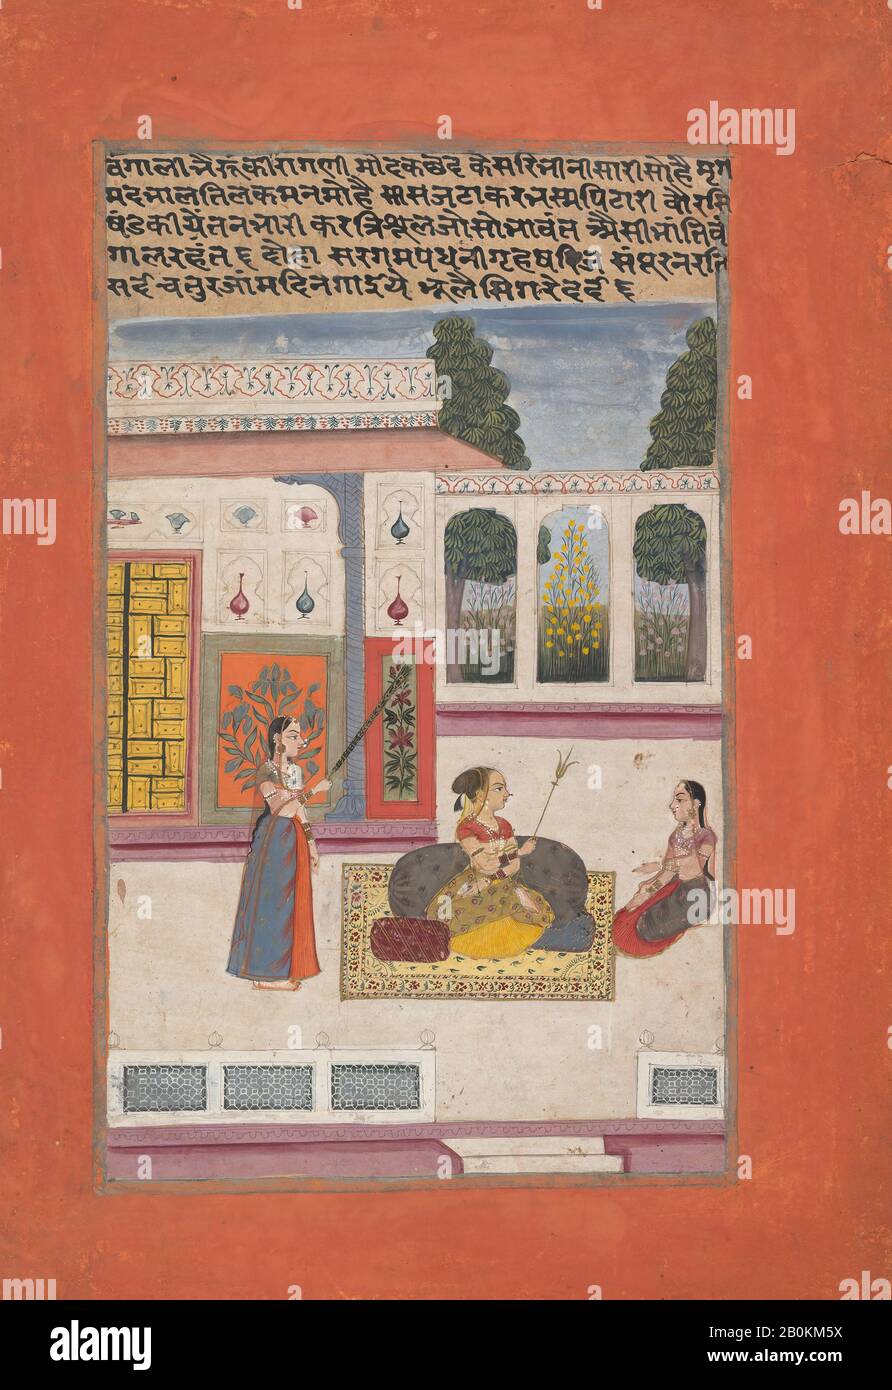 Bangali Ragini: Folio from a ragamala series (Garland of Musical Modes), India (Rajasthan, Amber), 1709, India (Rajasthan, Amber), Ink, opaque watercolor, and gilt on paper, 13 3/4 x 9 1/8 in. (34.9 x 23.2 cm), Paintings Stock Photo